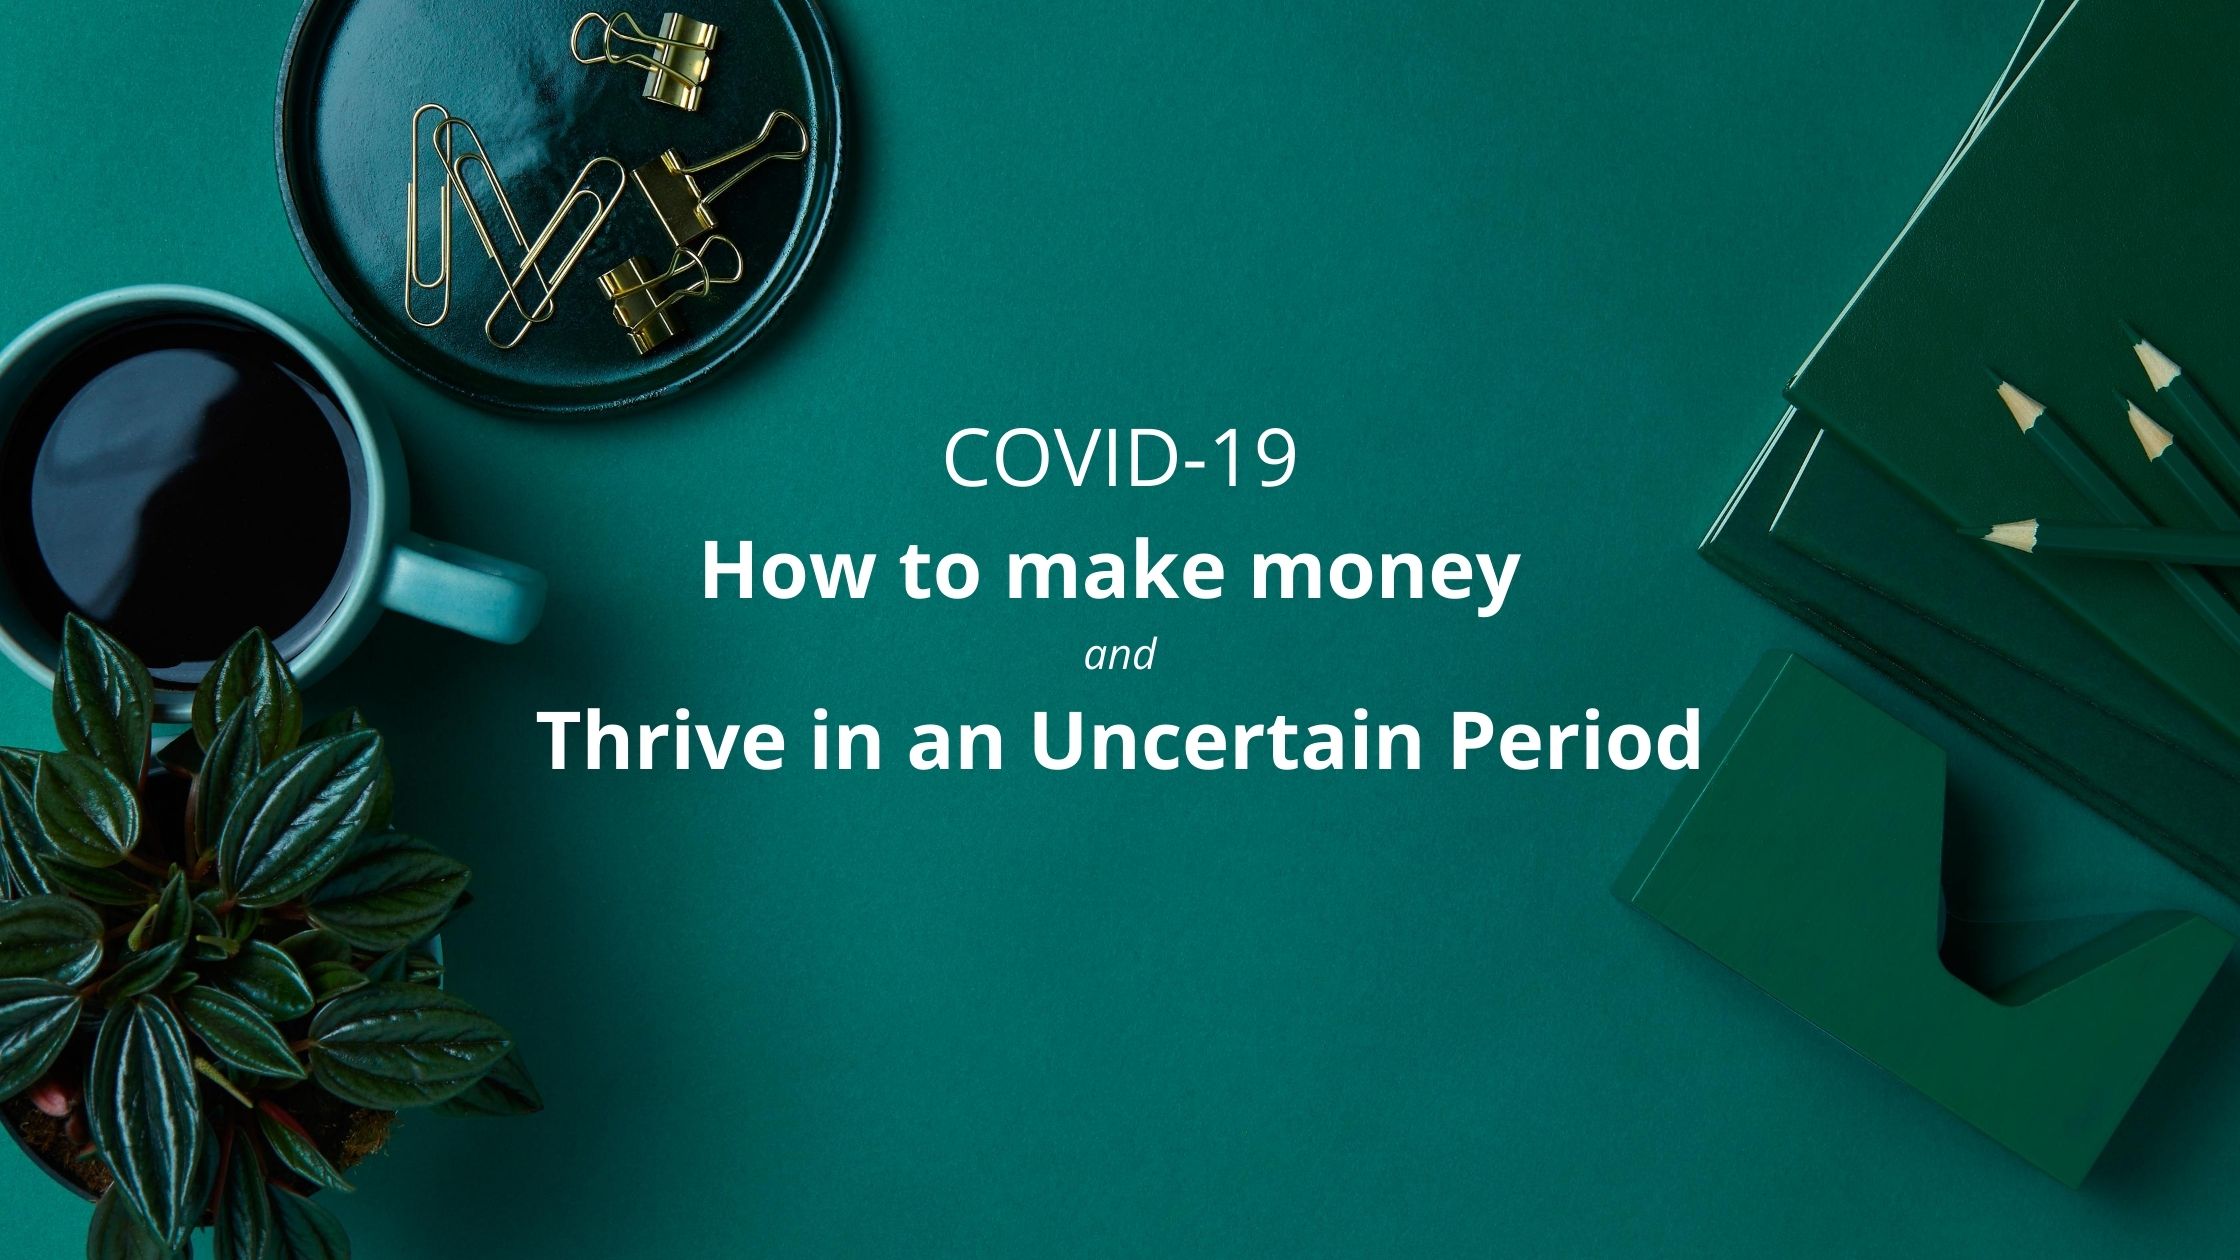 COVID-19: How to make Money and Thrive in an Uncertain Period